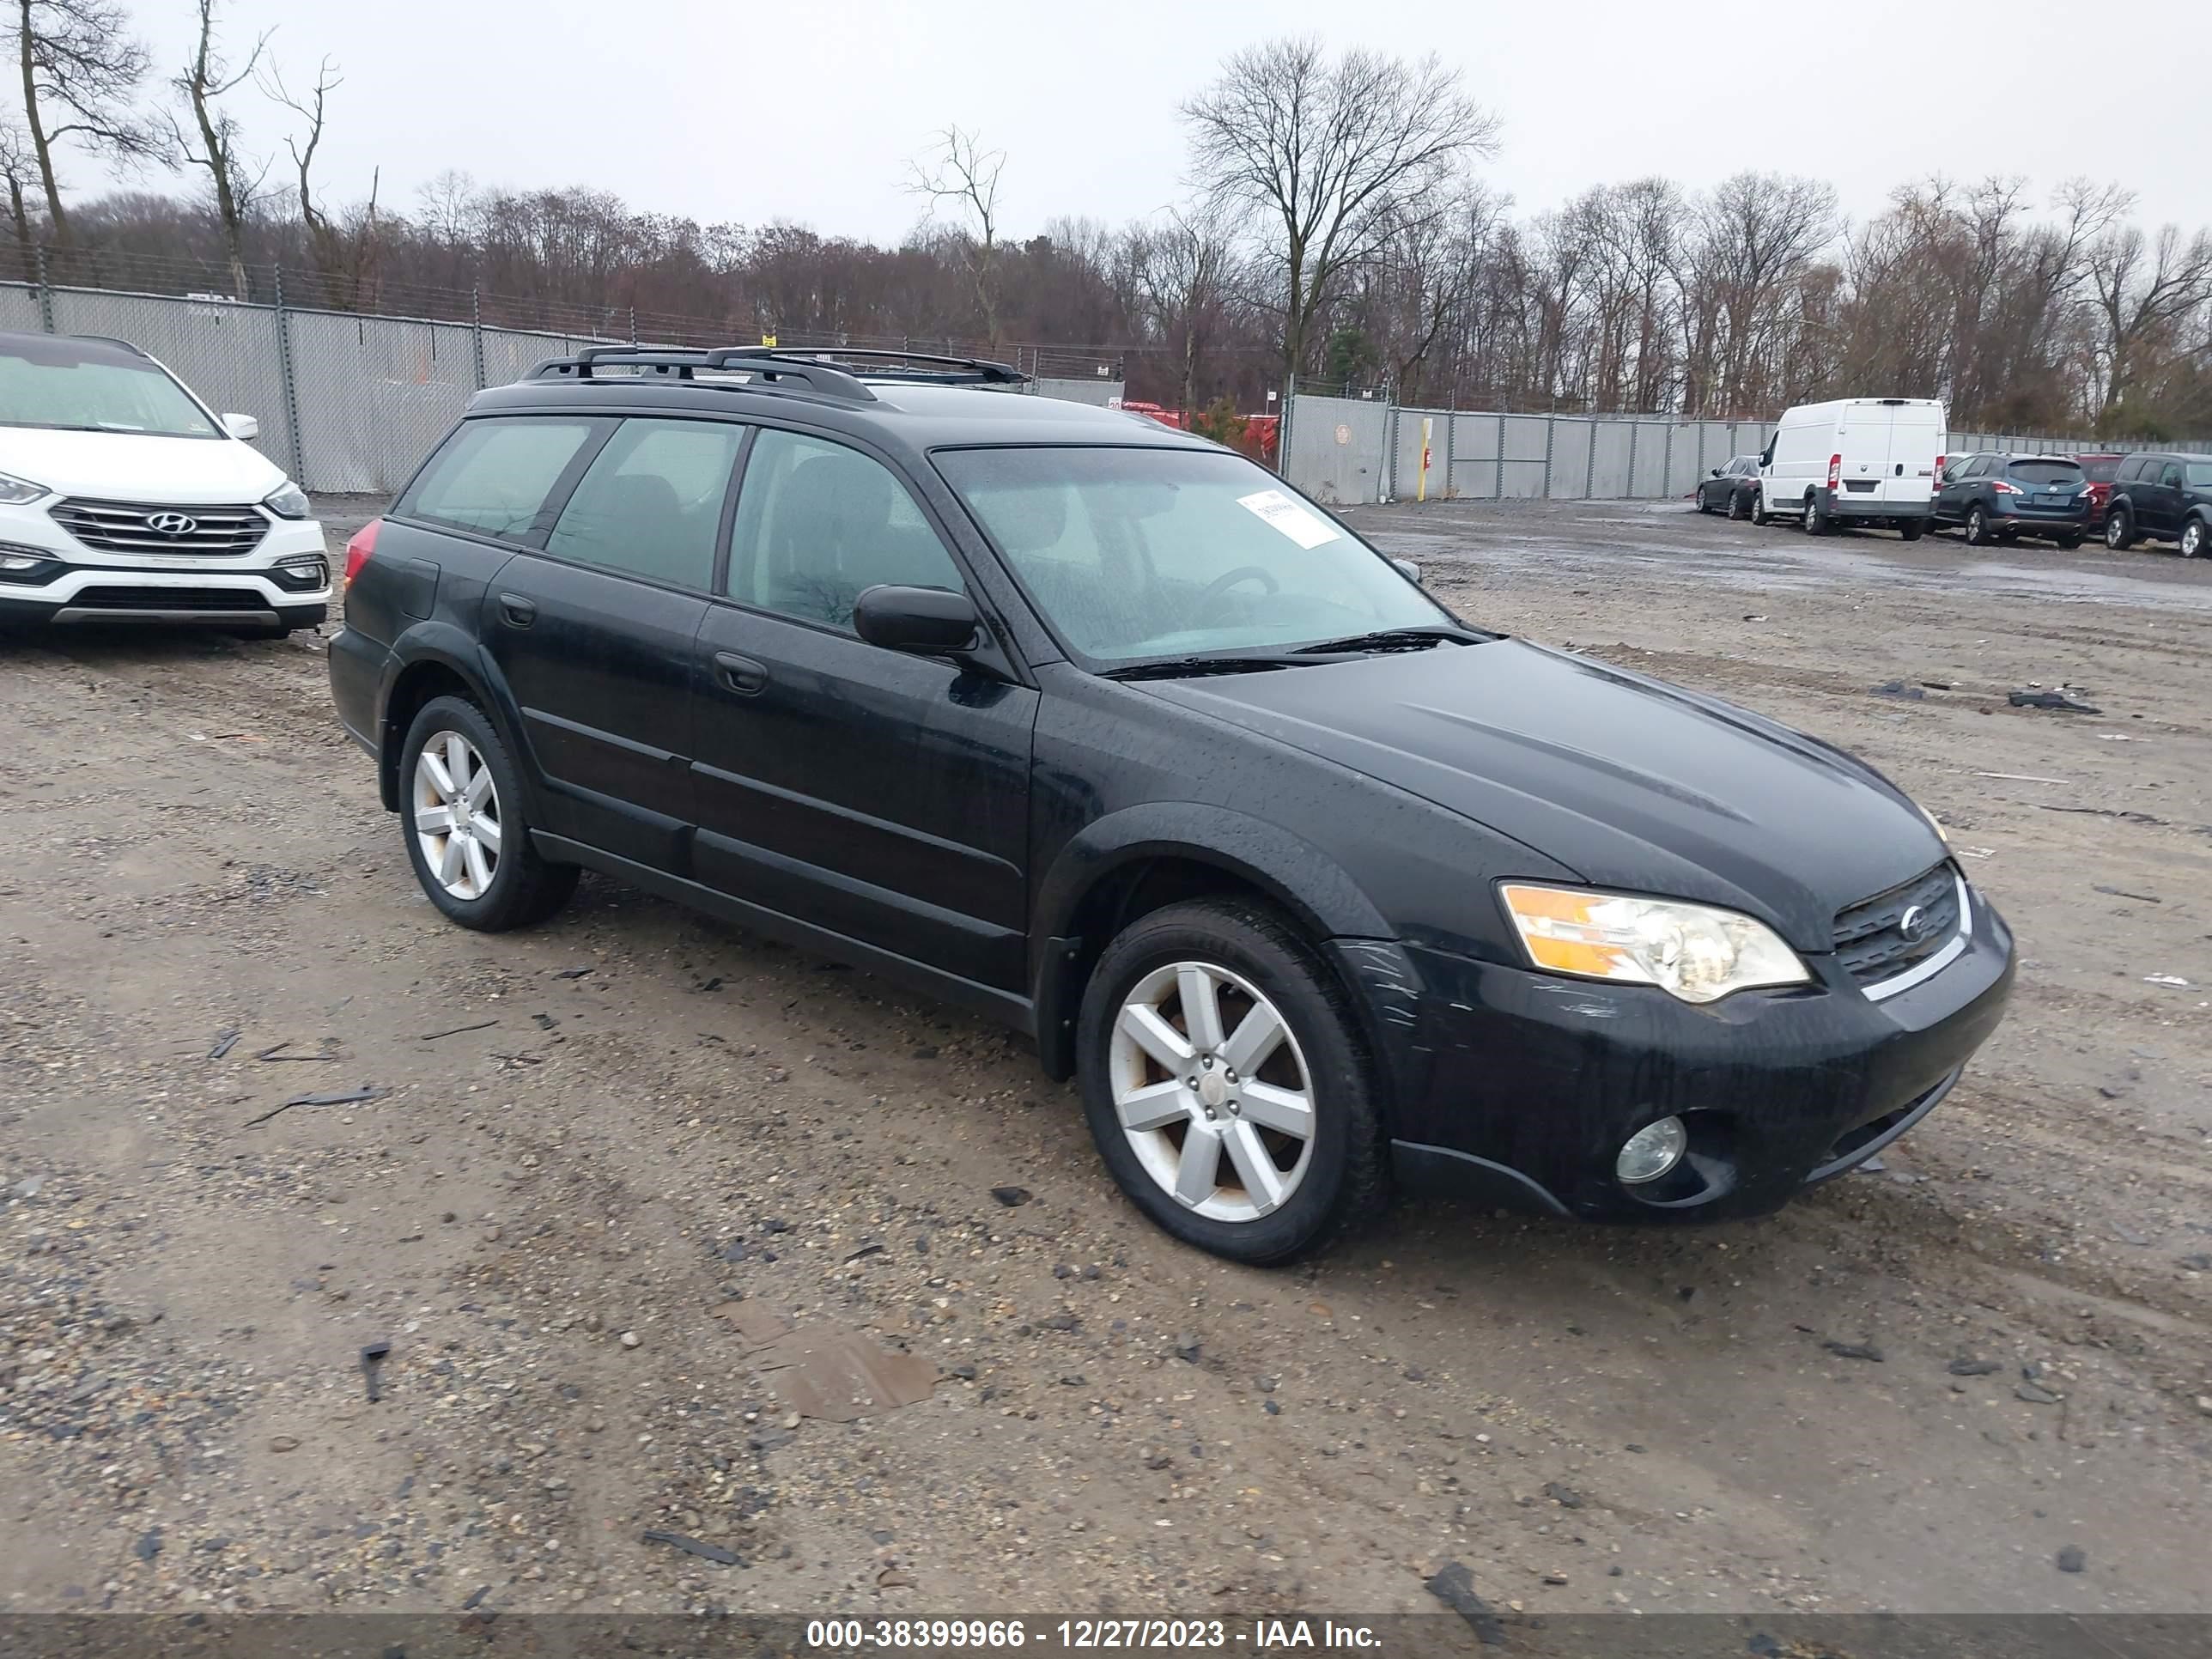 vin: 4S4BP61C277309319 4S4BP61C277309319 2007 subaru outback 2500 for Sale in 08012, 250 Blackwood Barnsboro Rd, Turnersville, New Jersey, USA